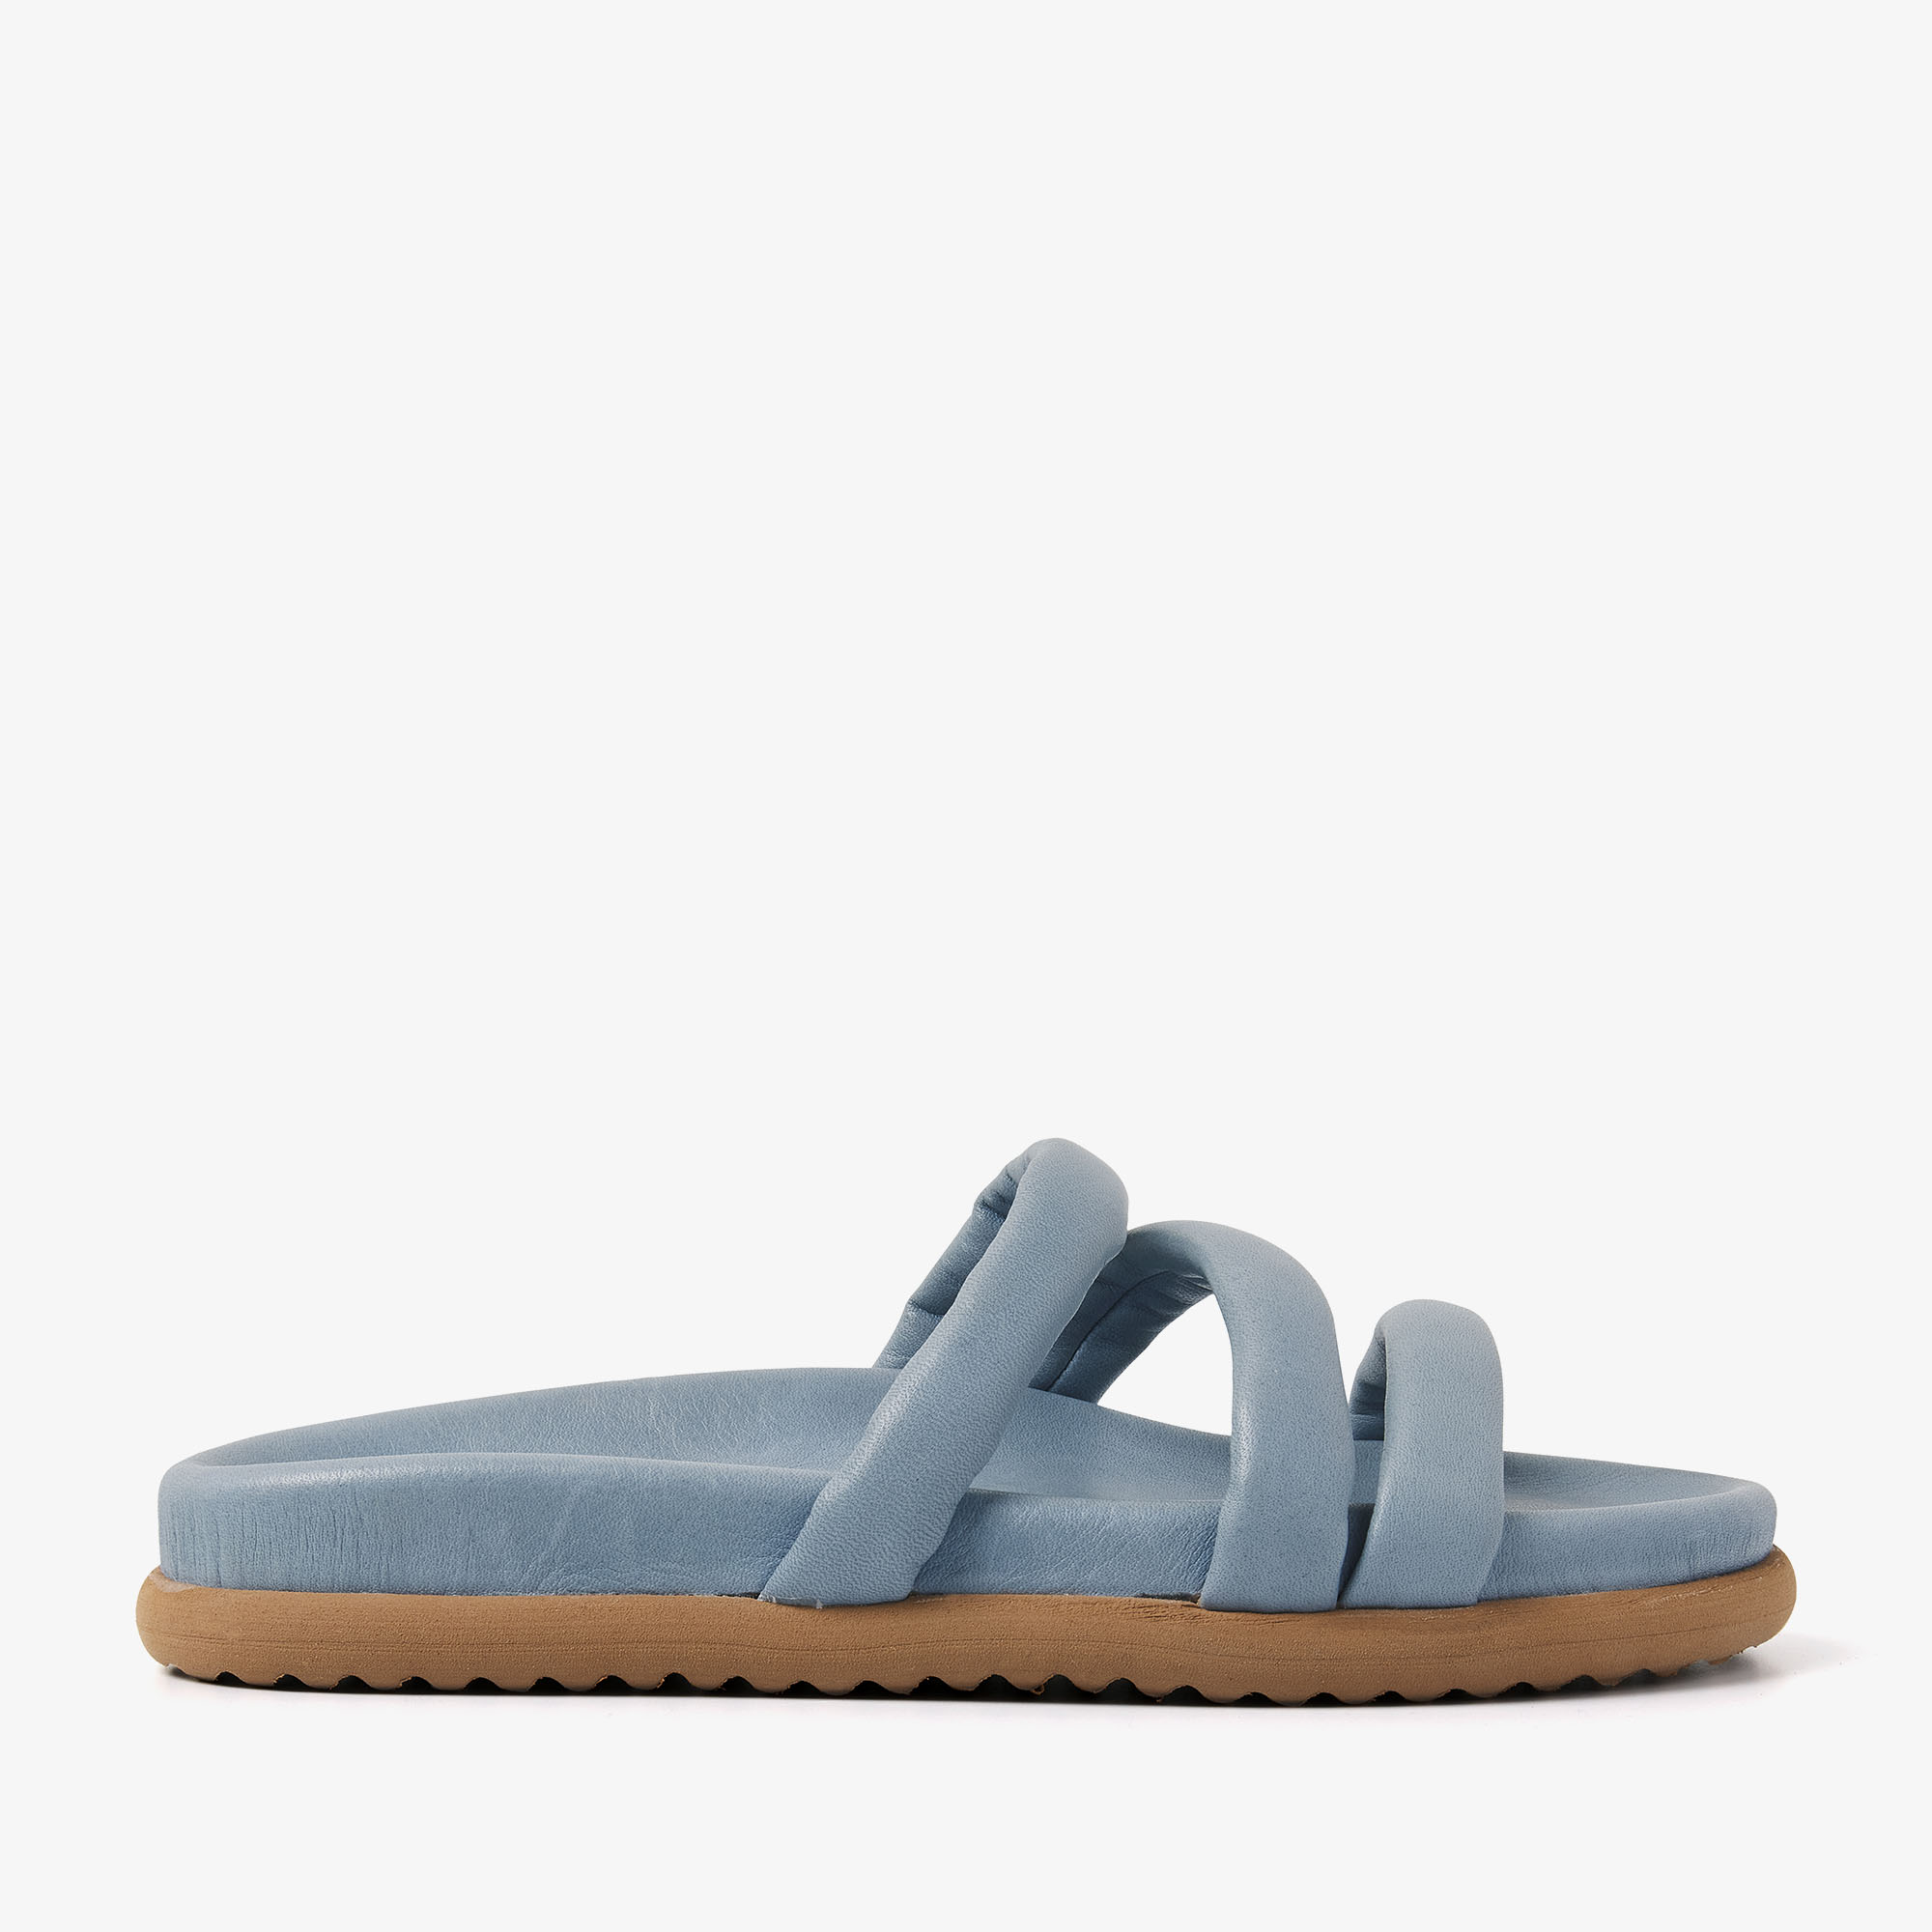 VIA VAI Candy Pop blauwe slippers dames - Leather